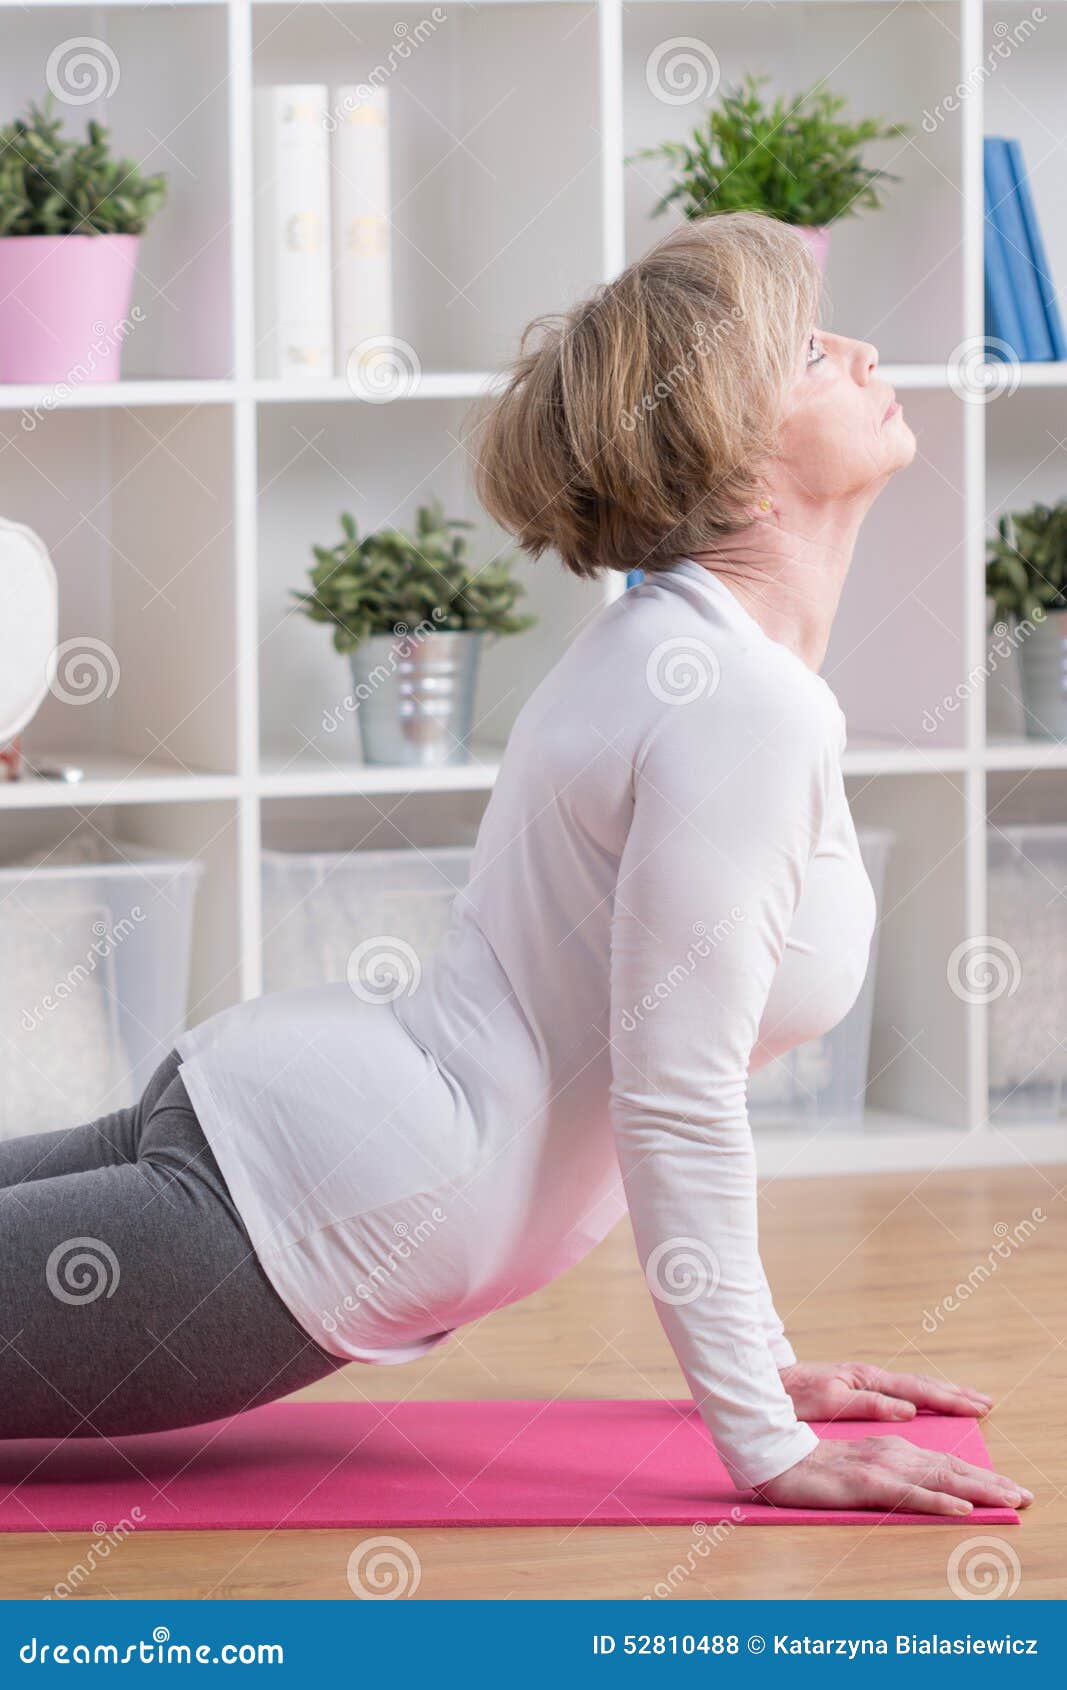 4,781 Aged Doing Middle Woman Yoga Stock Photos - Free & Royalty-Free Stock  Photos from Dreamstime